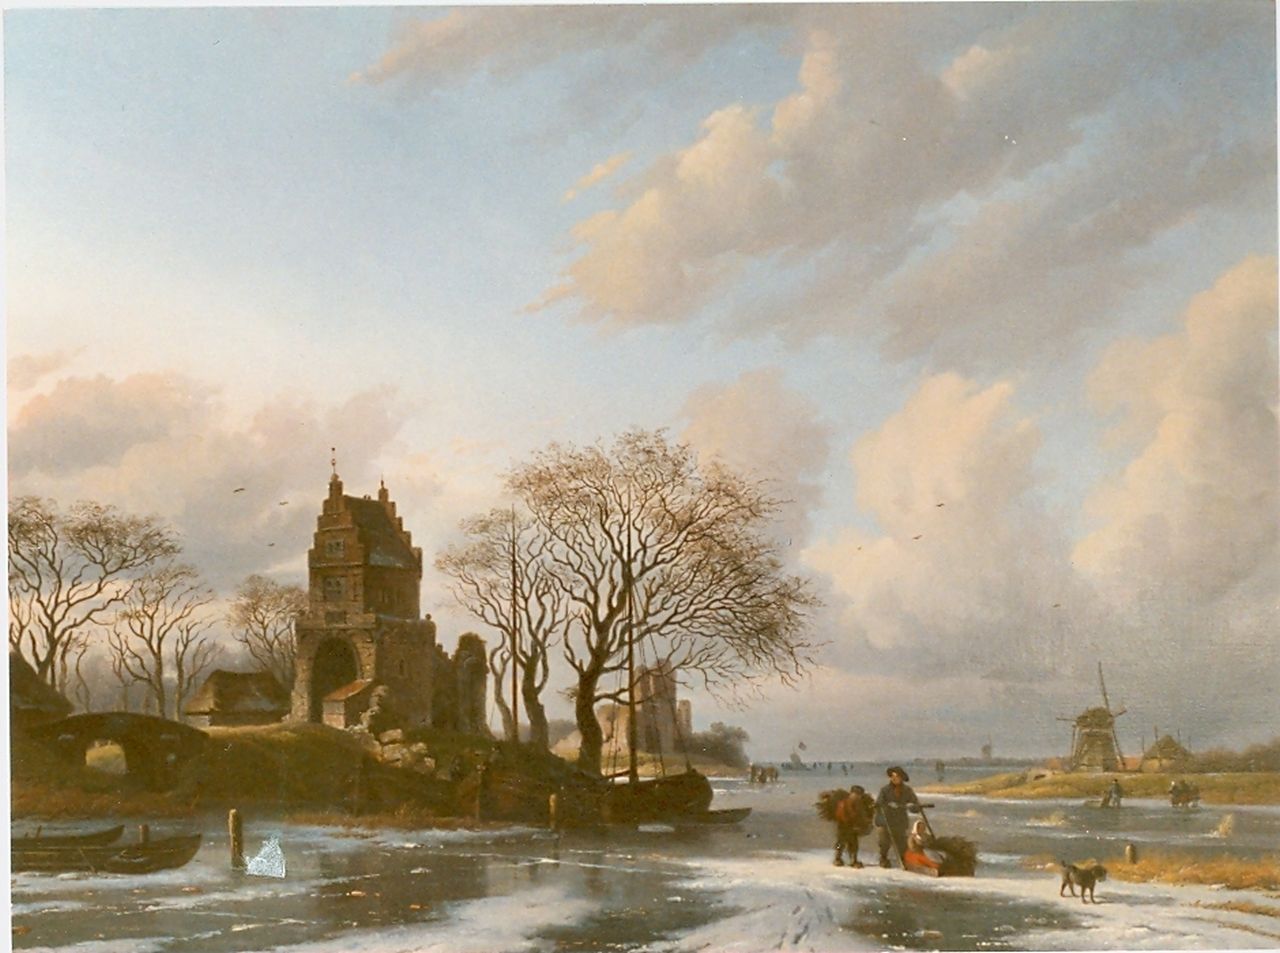 Eymer A.J.  | Arnoldus Johannes Eymer, A winter landscape with figures on the ice, oil on canvas 65.0 x 87.3 cm, signed l.l. and dated 1850